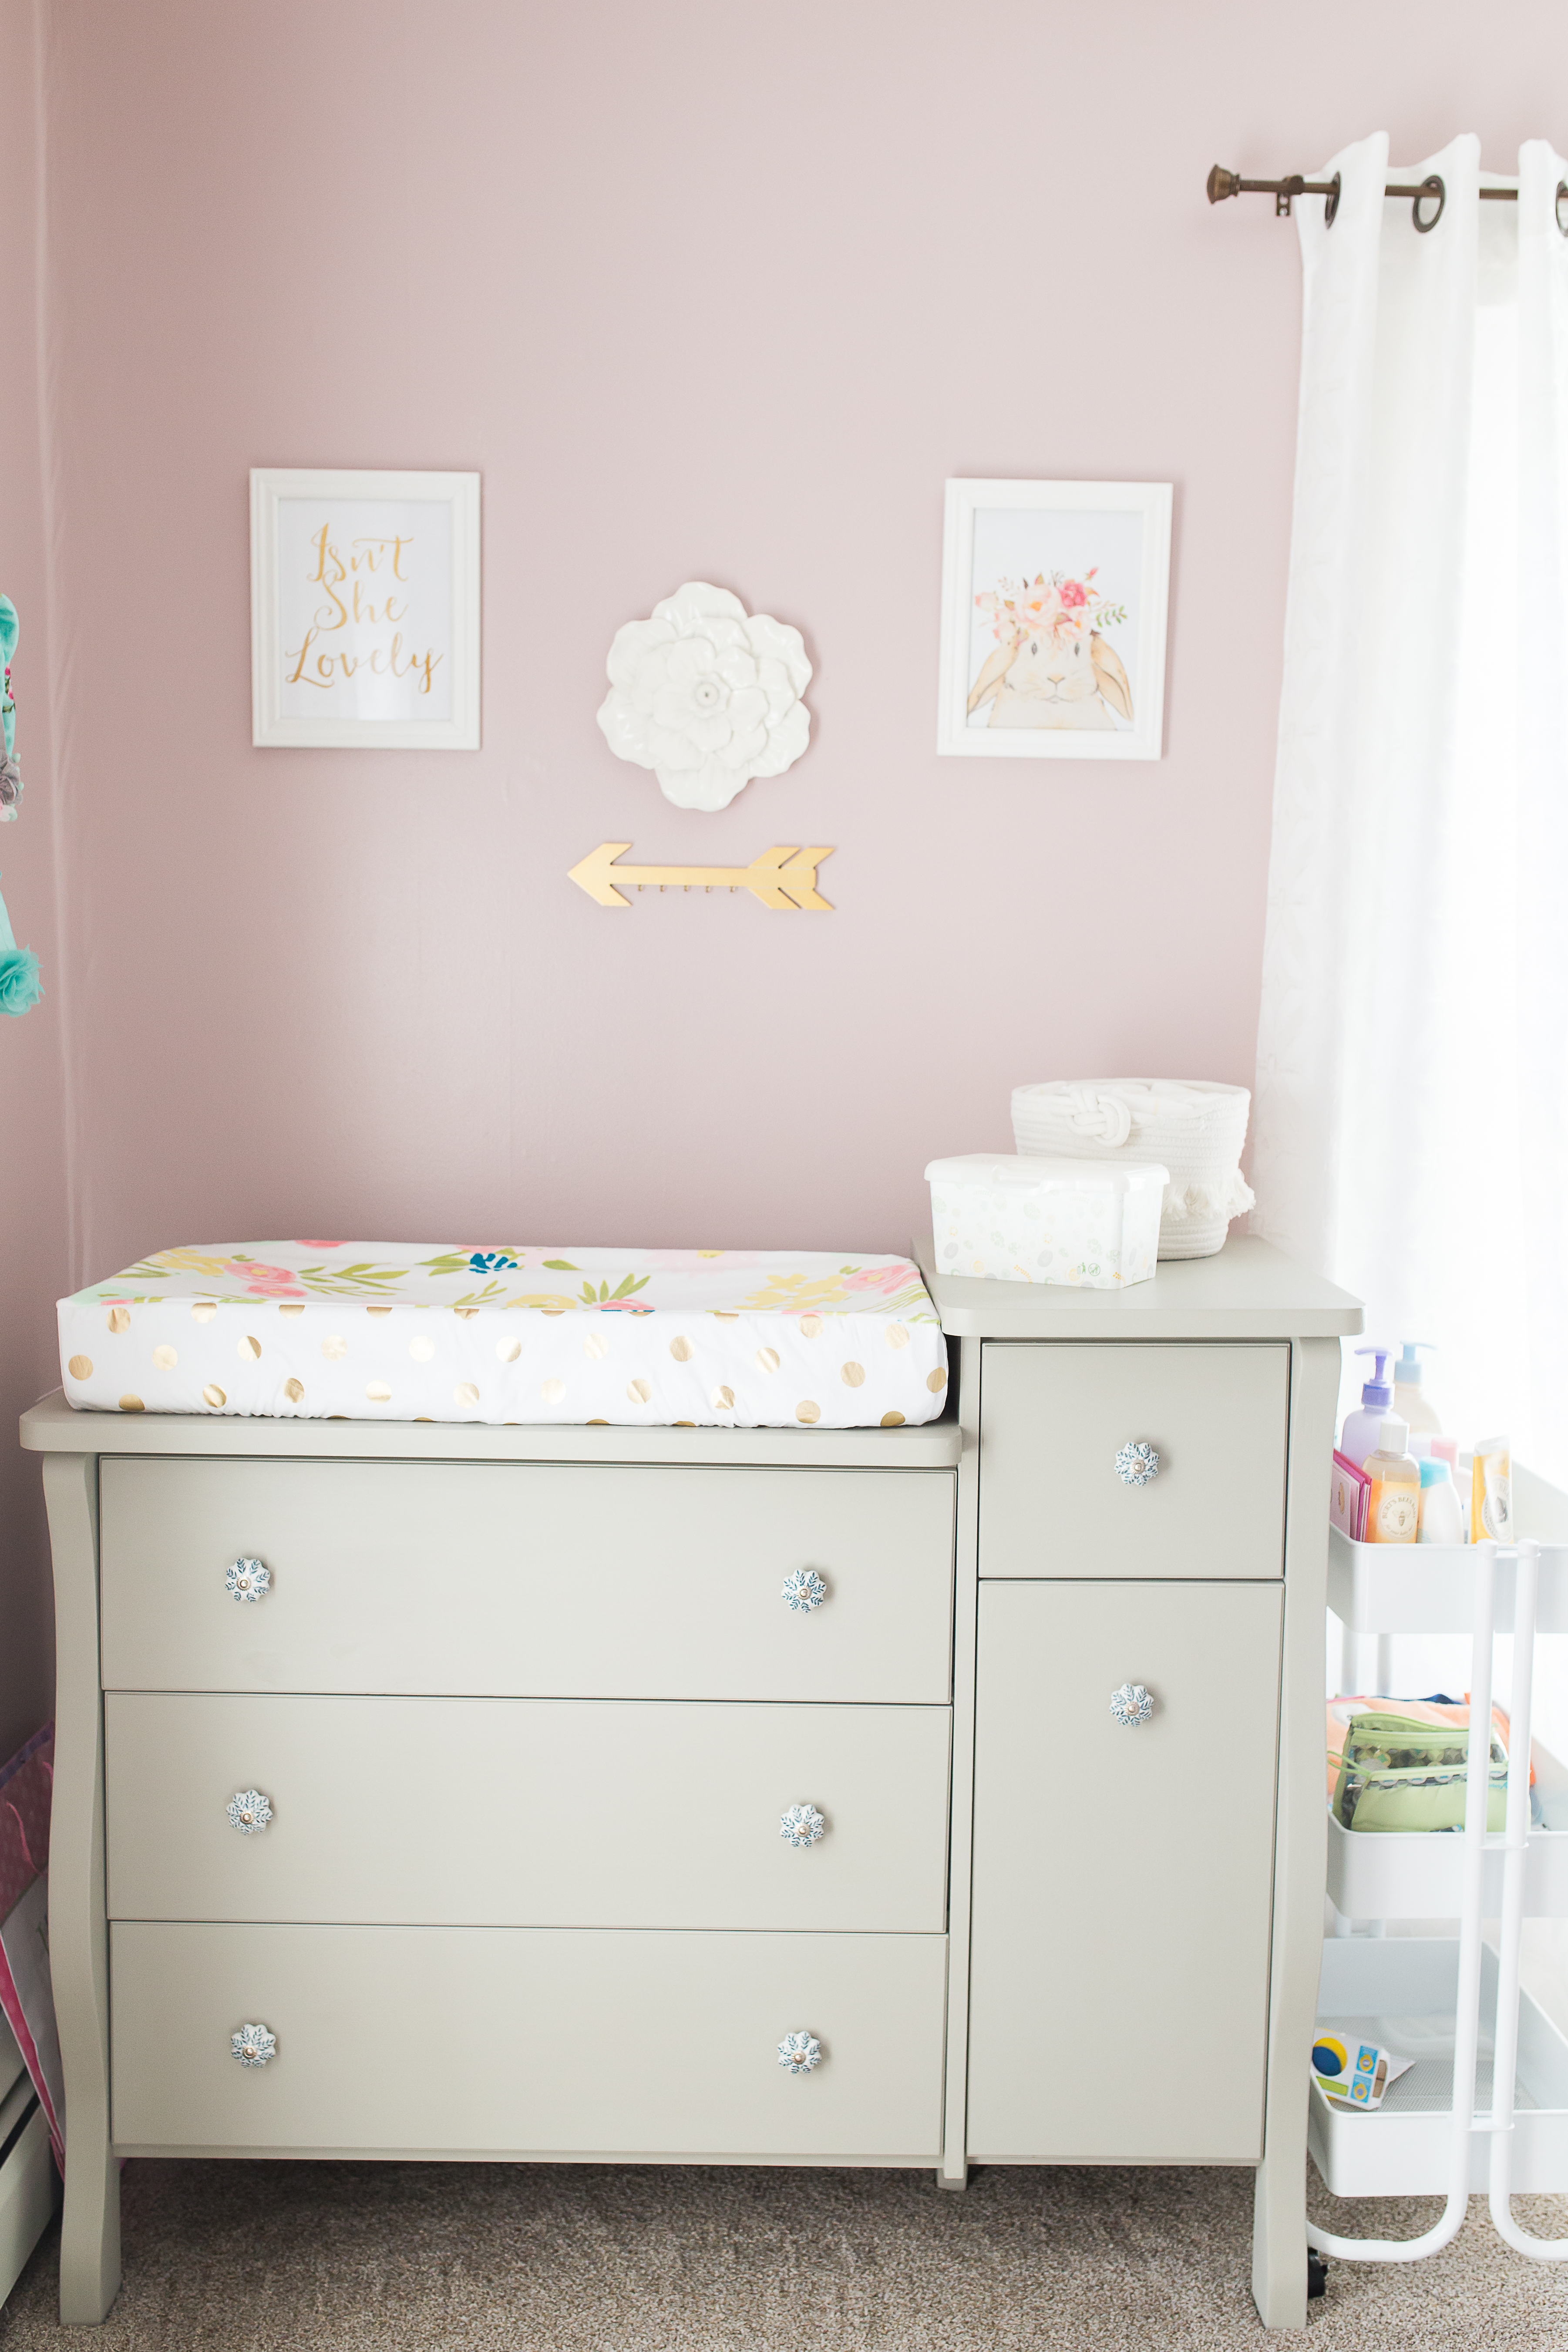 diy, repurposed, refinished, dresser, changing table, grey,